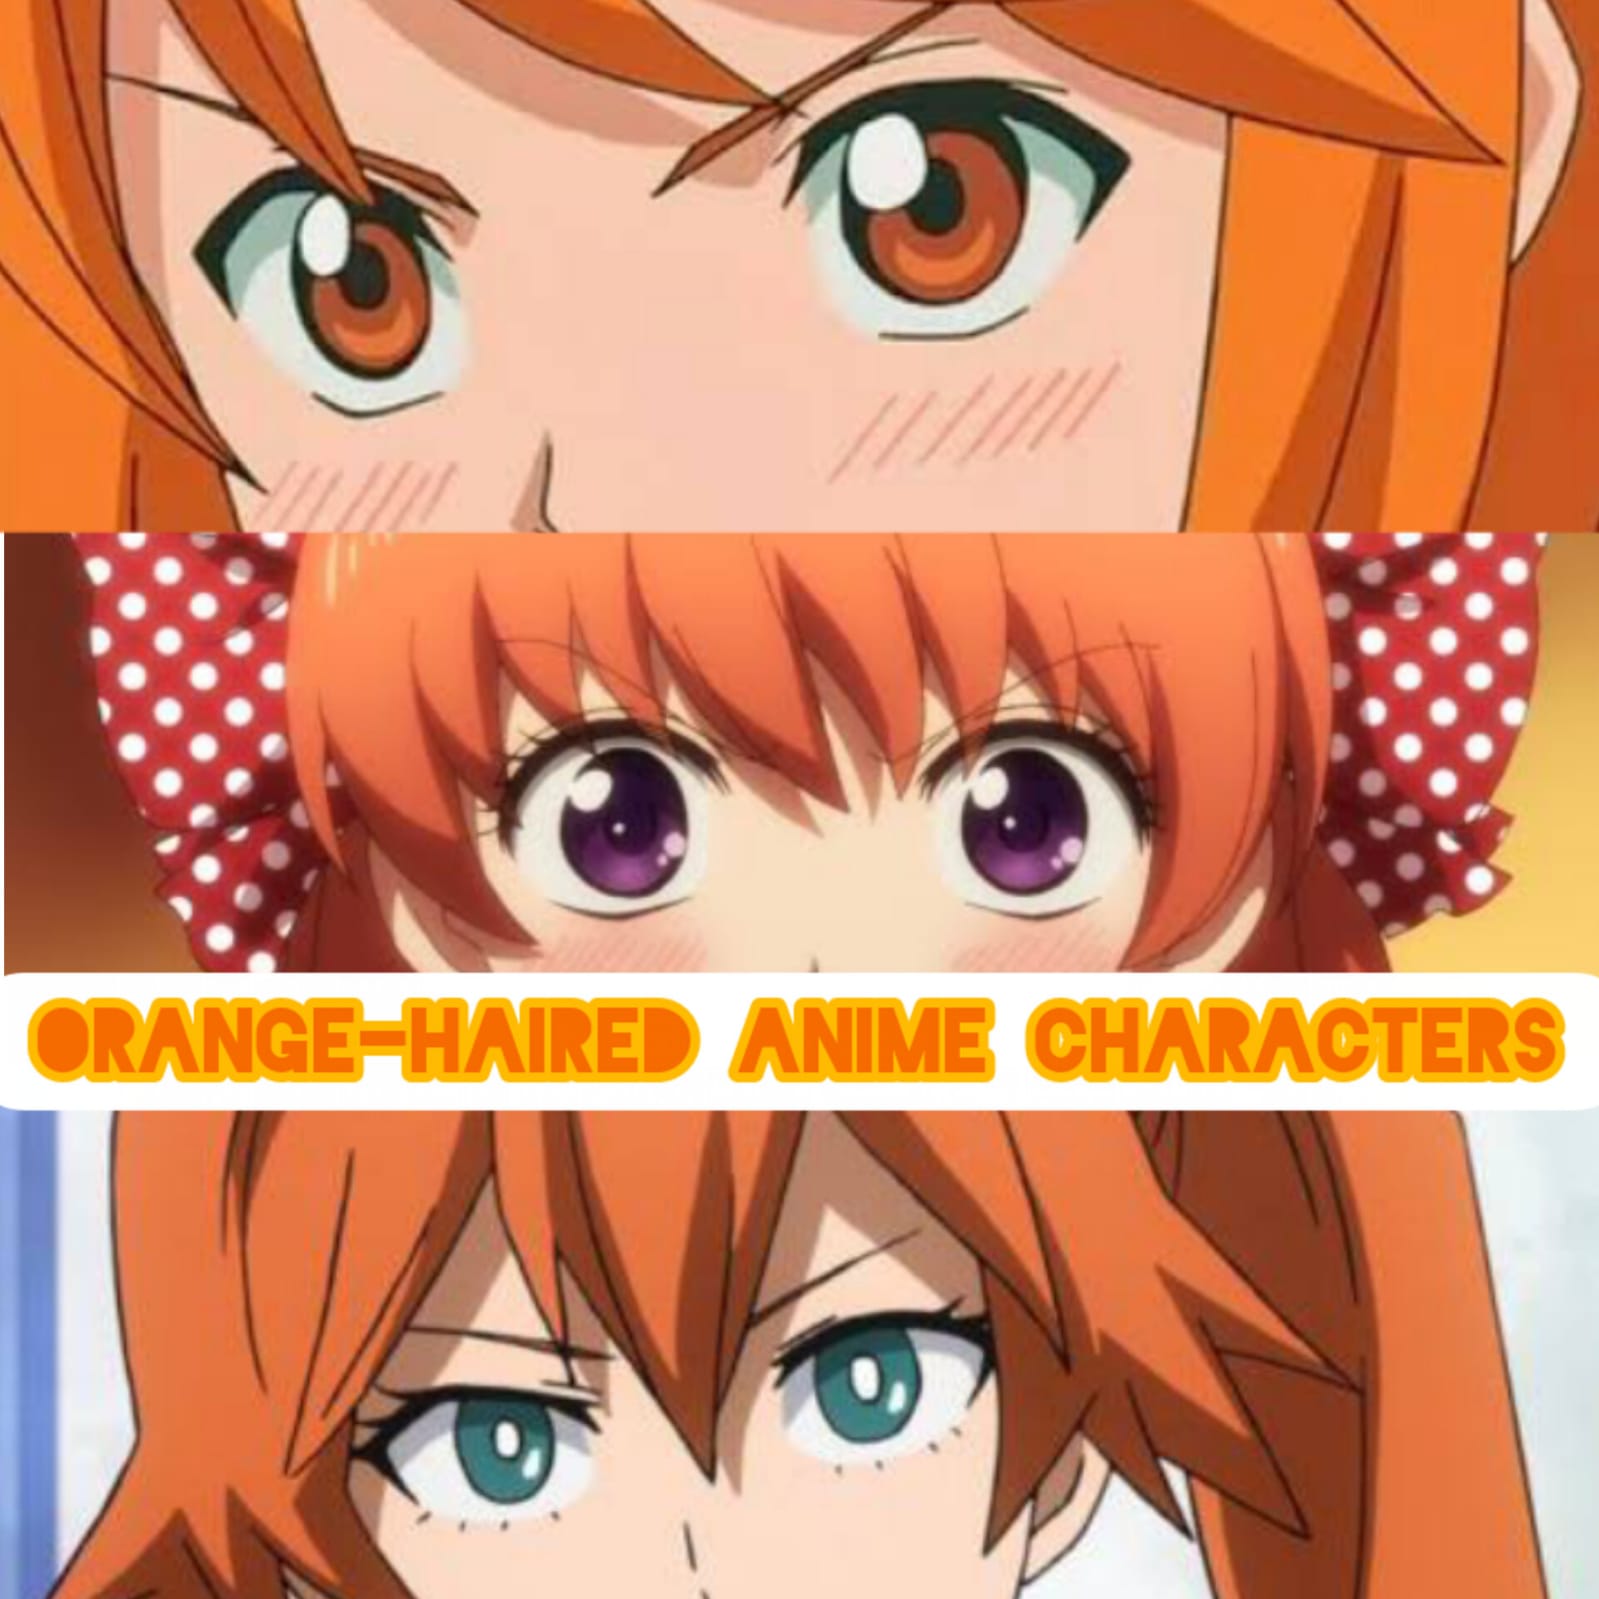 20 Most Popular Orange-Haired Anime Characters (Ranked)